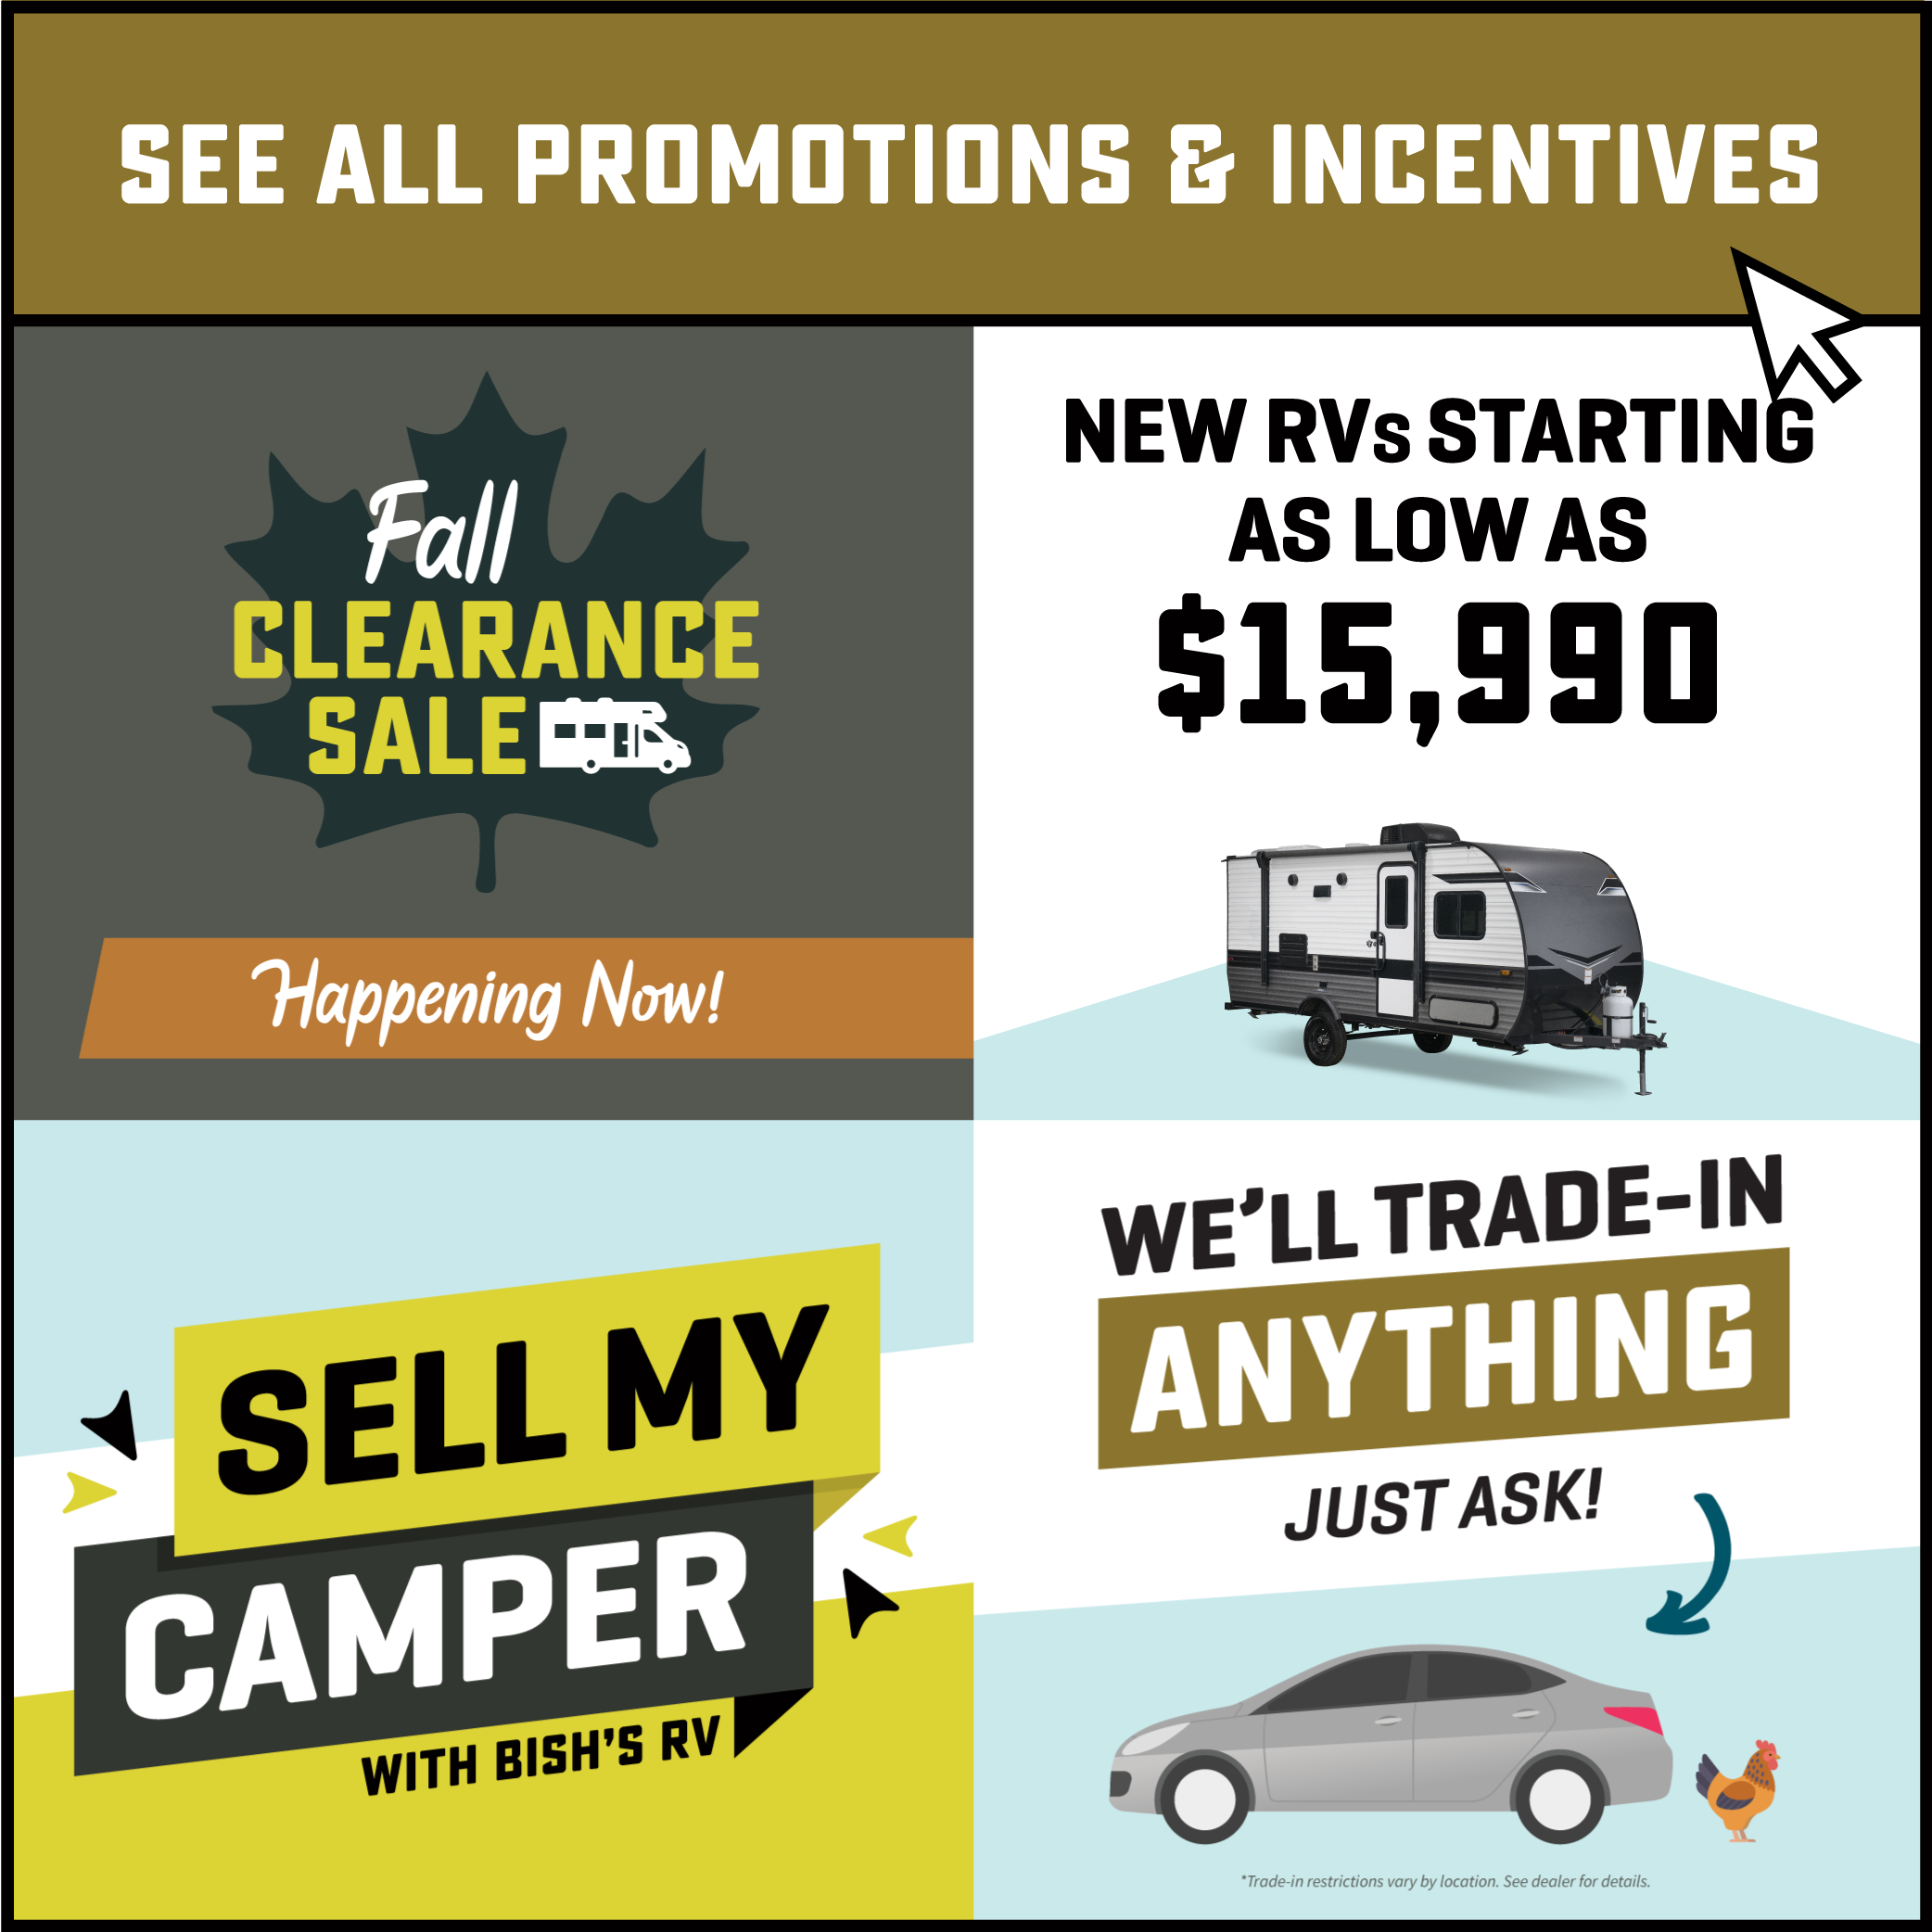 Current sales incentives, deals, and promotions happening at Bish's RV